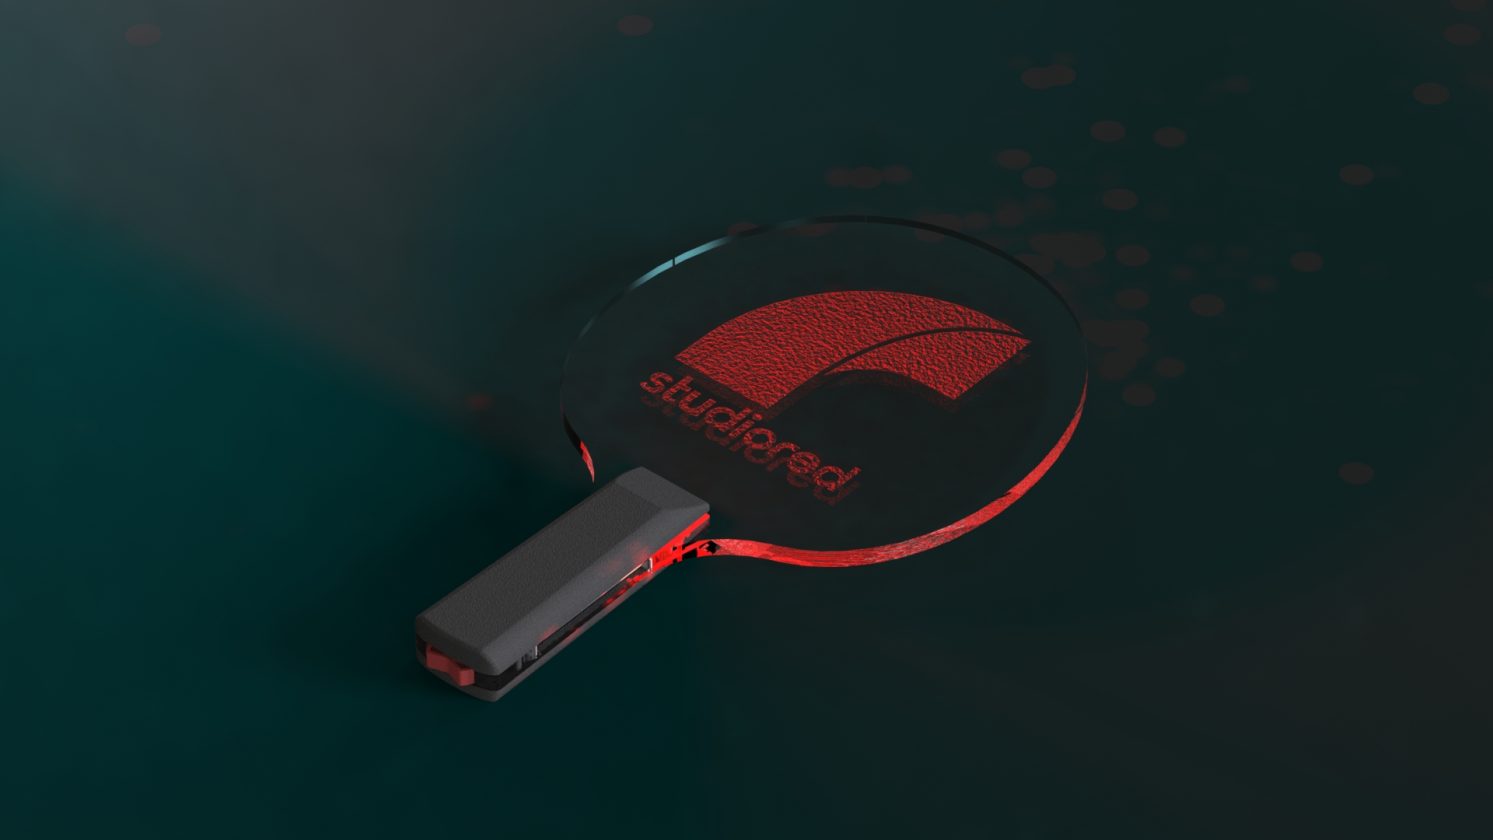 rendered pingpong paddle